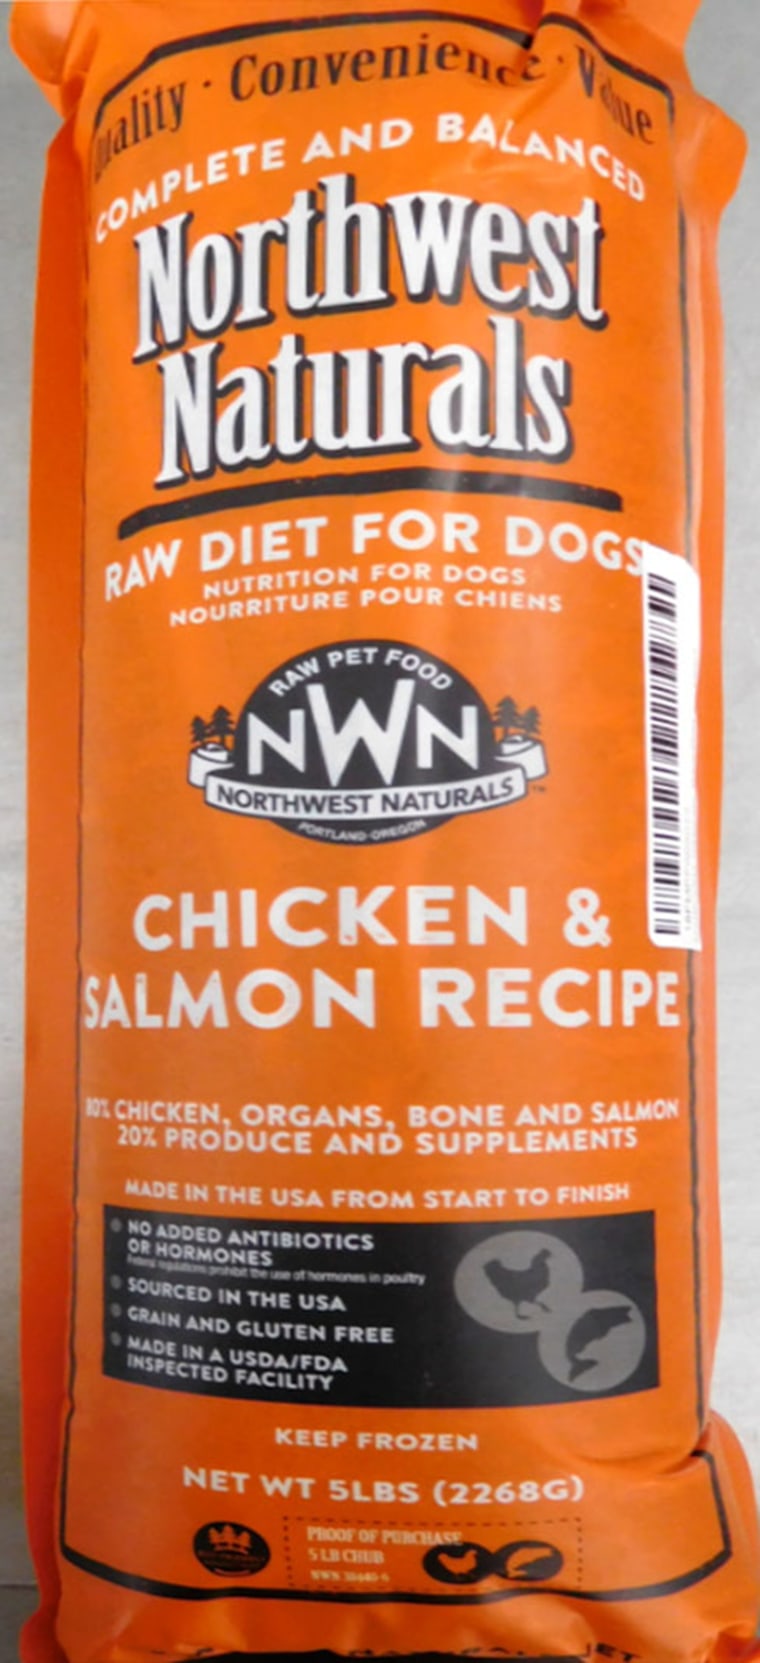 FDA issues another pet food recall